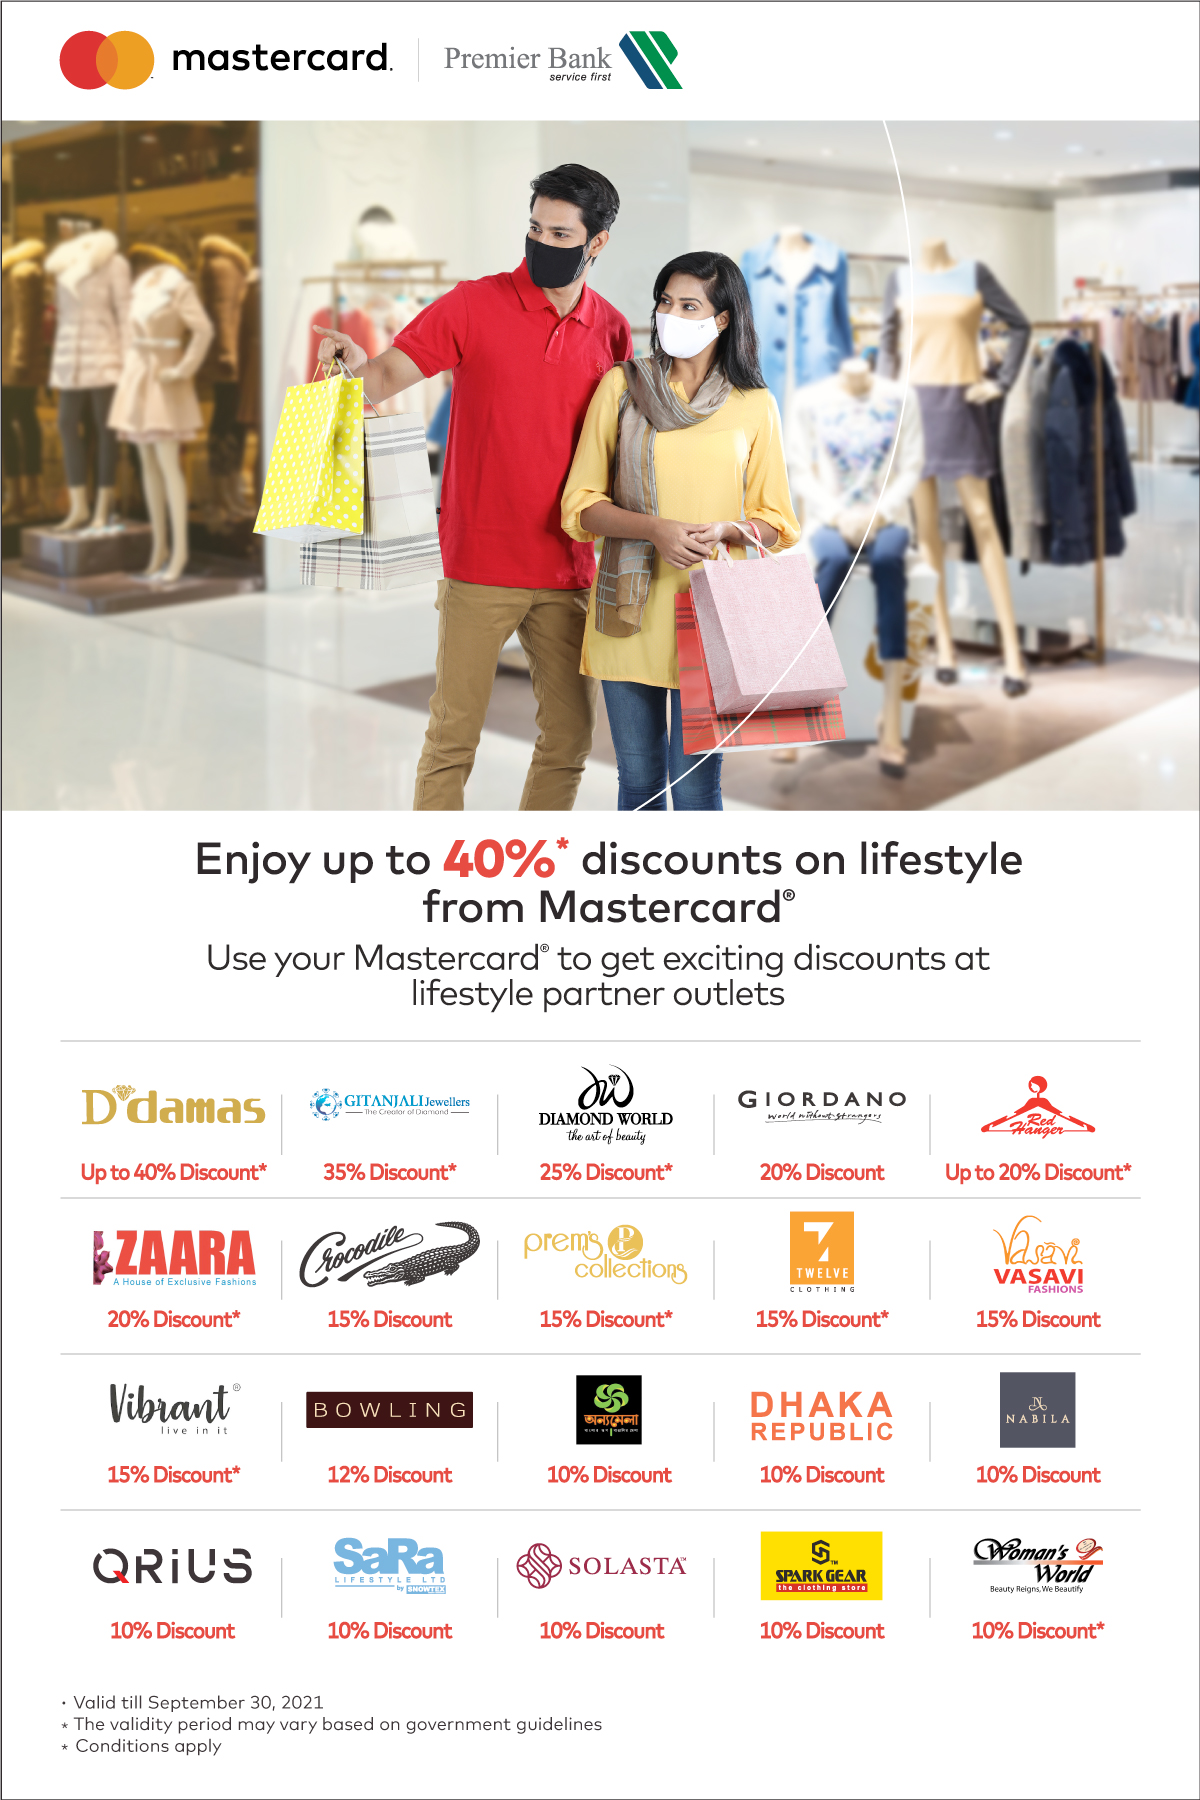 Enjoy Discounts on Lifestyle by Premier Bank Mastercard